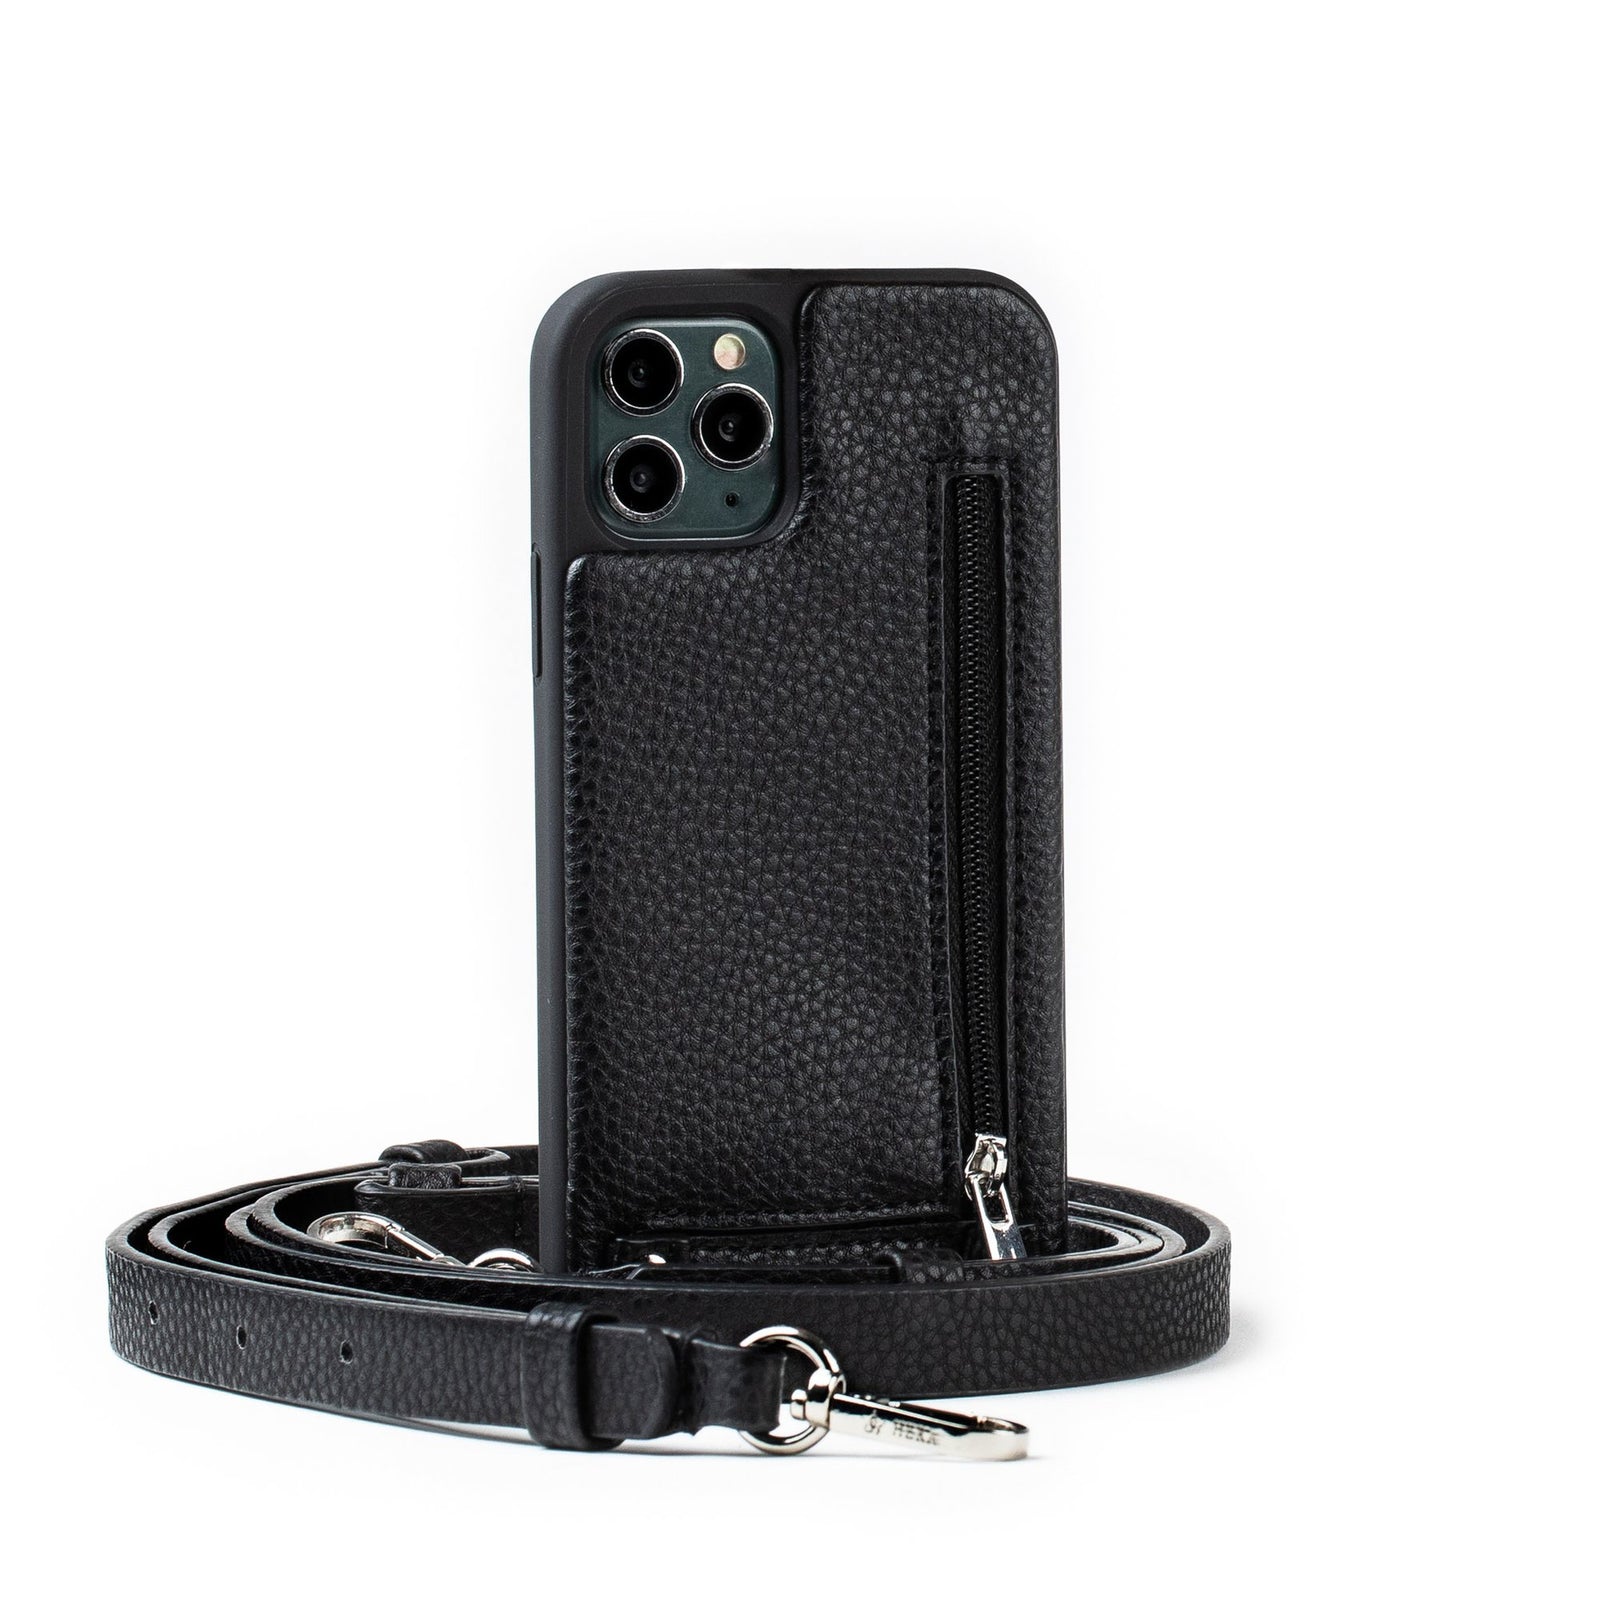 iPhone Carrying Case For 11 Pro Max - Order The Victoria - Hera Cases